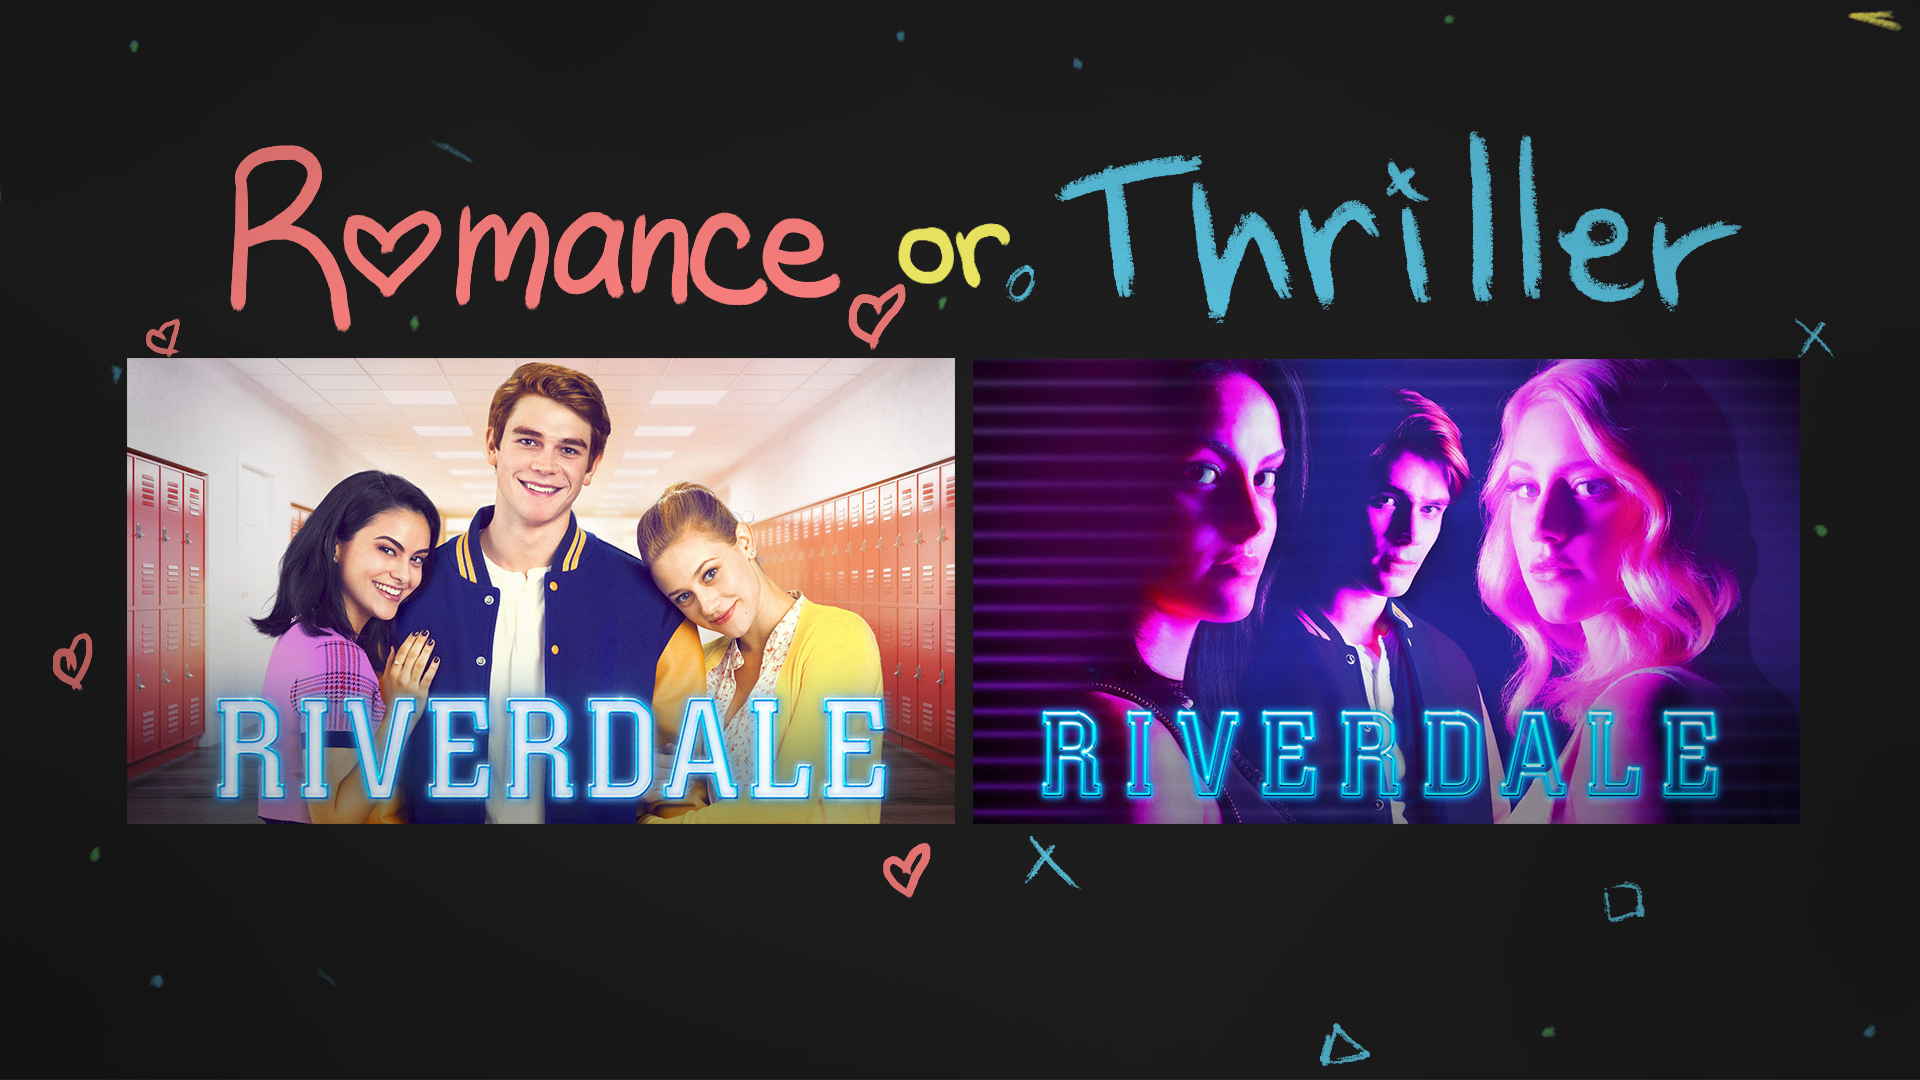 A romantic well-lit thumbnail of the show Riverdale versus a dramatic and mysterious version.